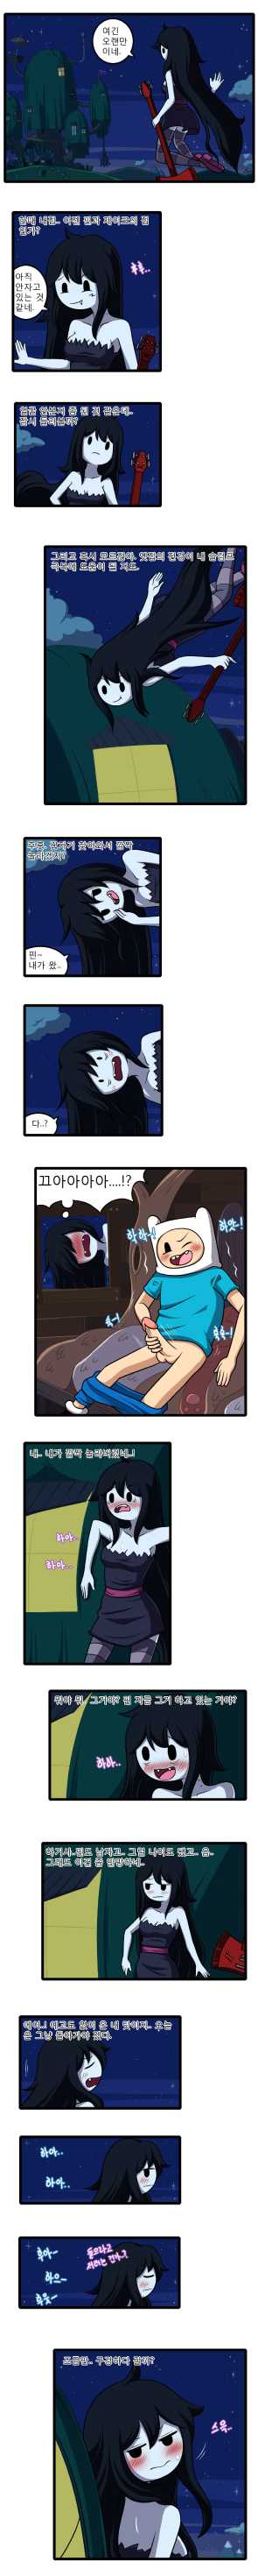 [WB] Adult Time 4 (Adventure Time) [Korean] - Page 3